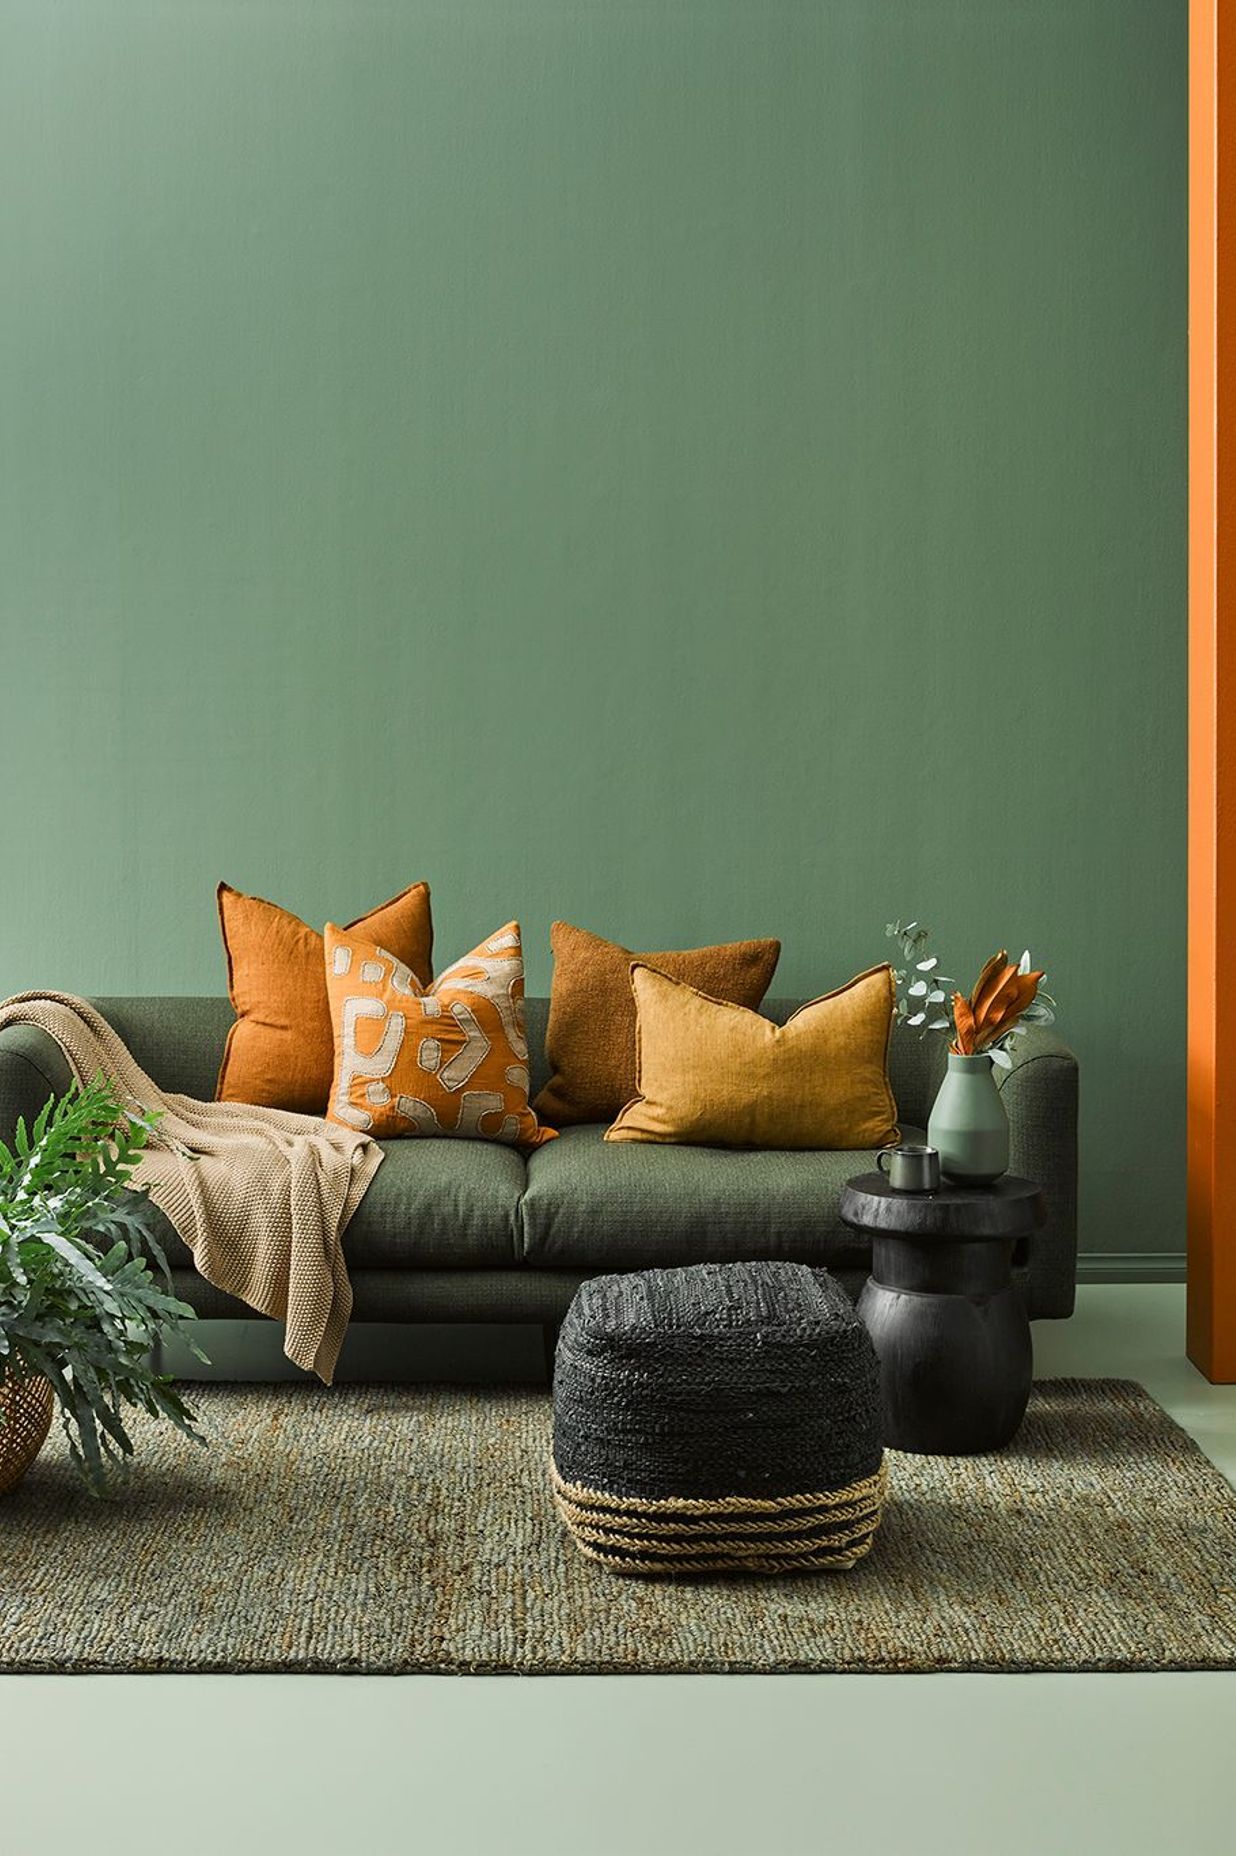 In 2023, we're seeing bold yet earthy colours juxtaposed, creating warm yet restrained spaces.